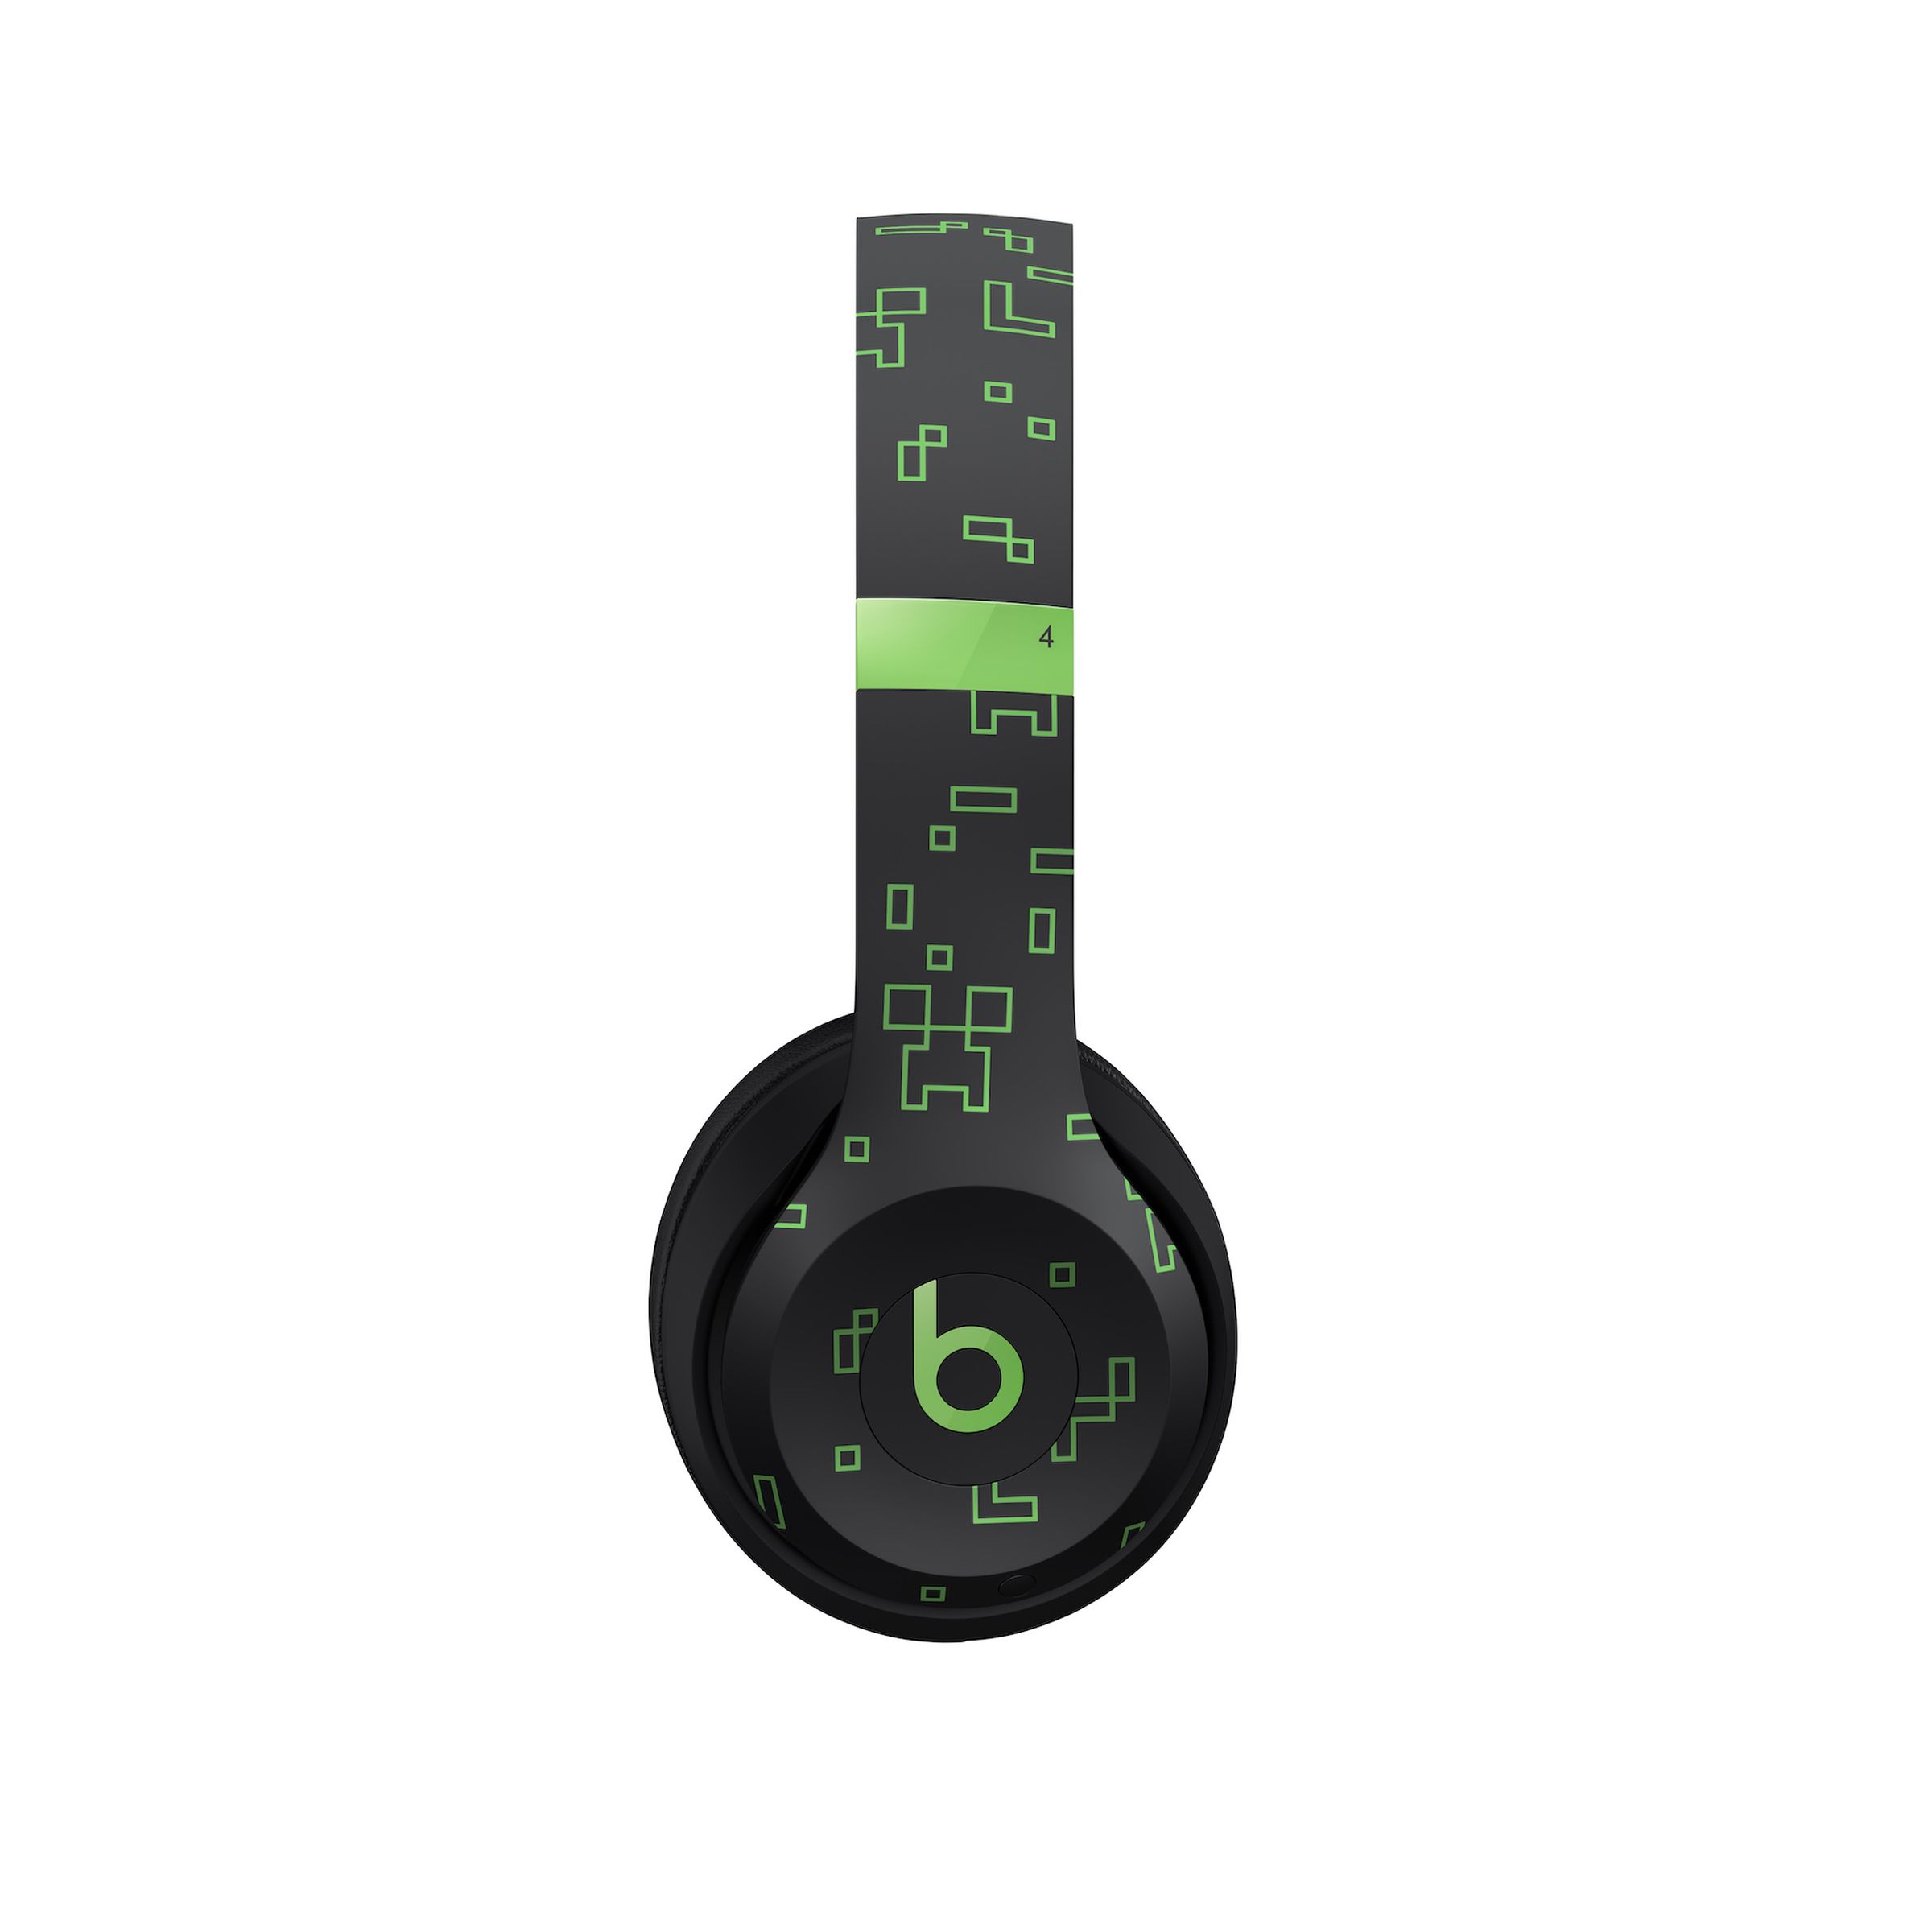 A marketing image of the Minecraft Beats Solo 4 headphones.